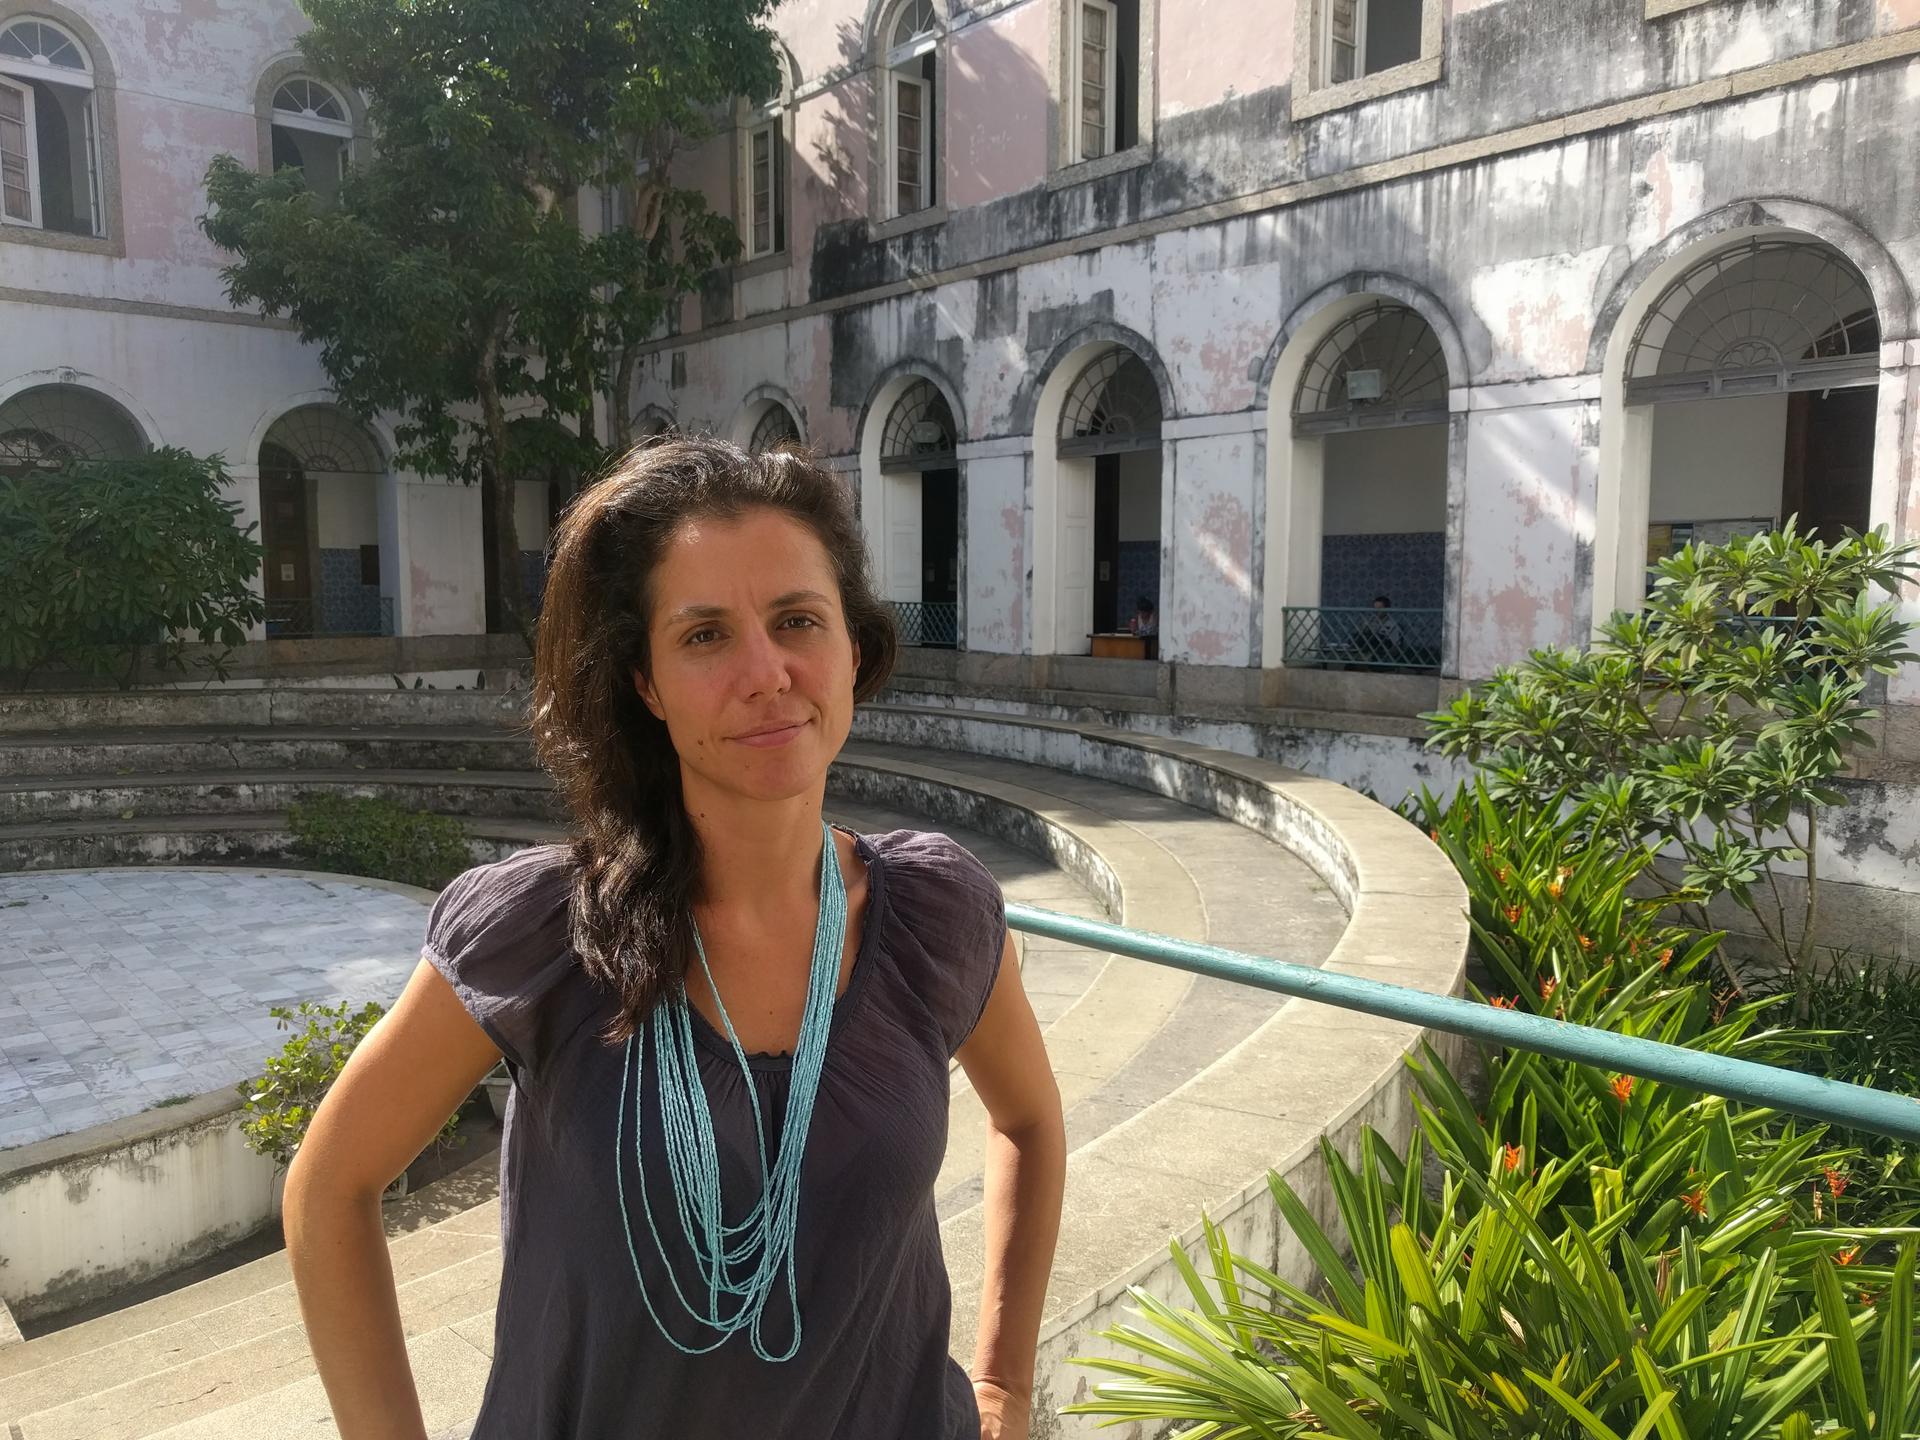 Isabela Nogueira is a professor at the Federal University of Rio de Janeiro's Institute of Economics, & head of its China Lab